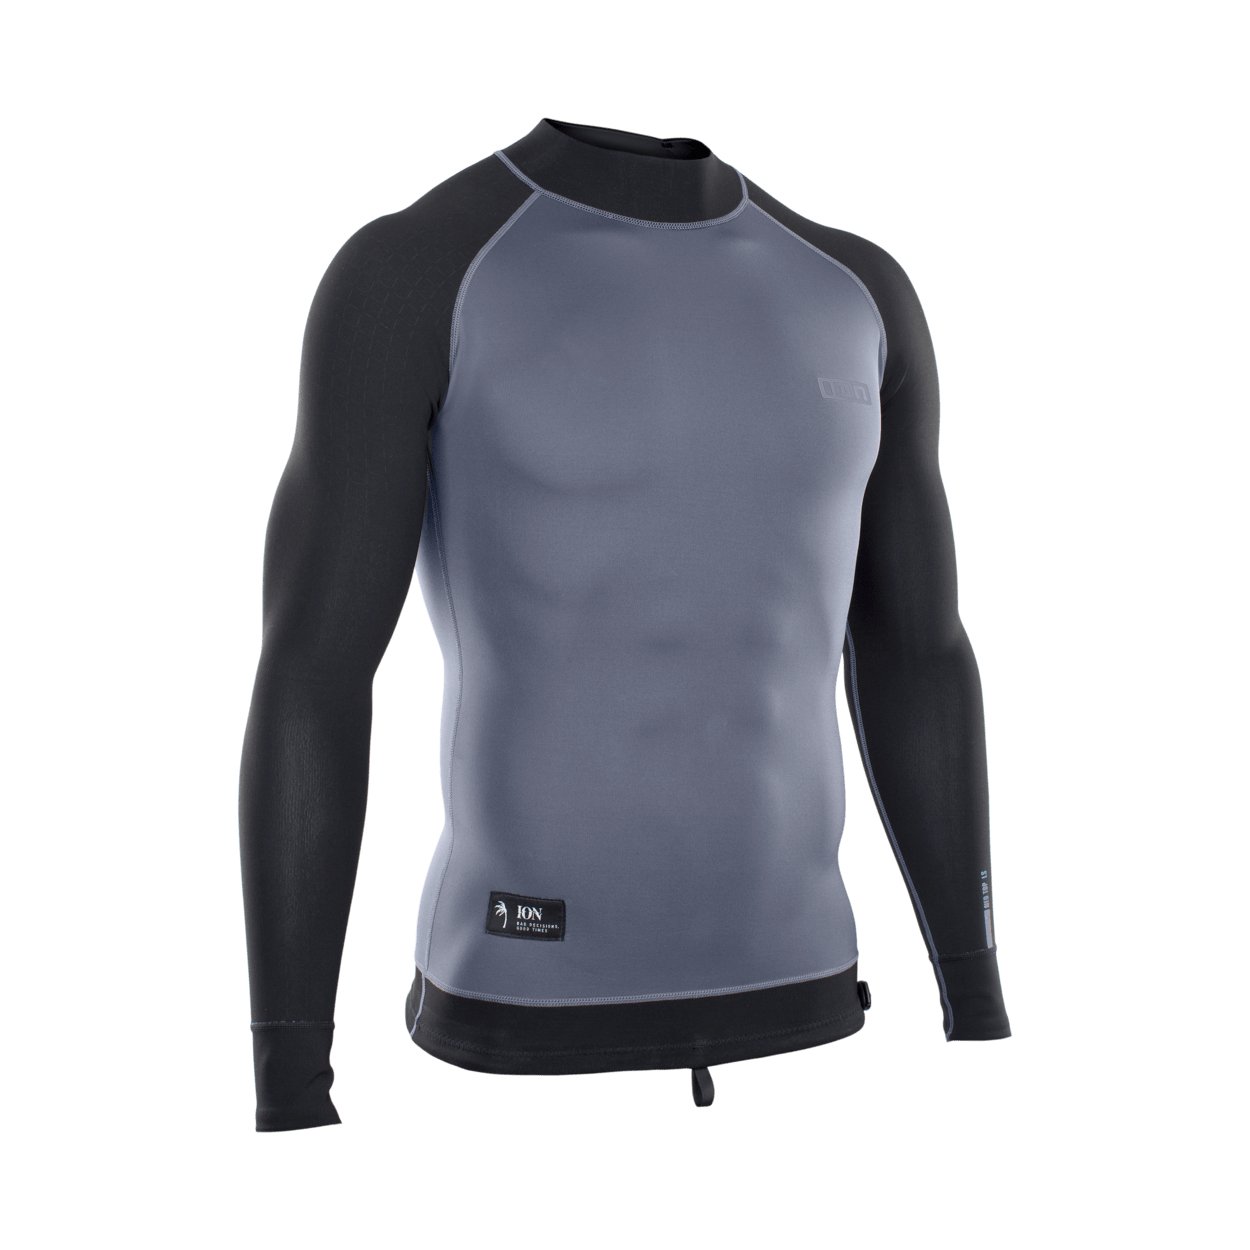 ION Neo Top Men 0.5 LS 2021 - Worthing Watersports - 9008415956081 - Tops - ION Water